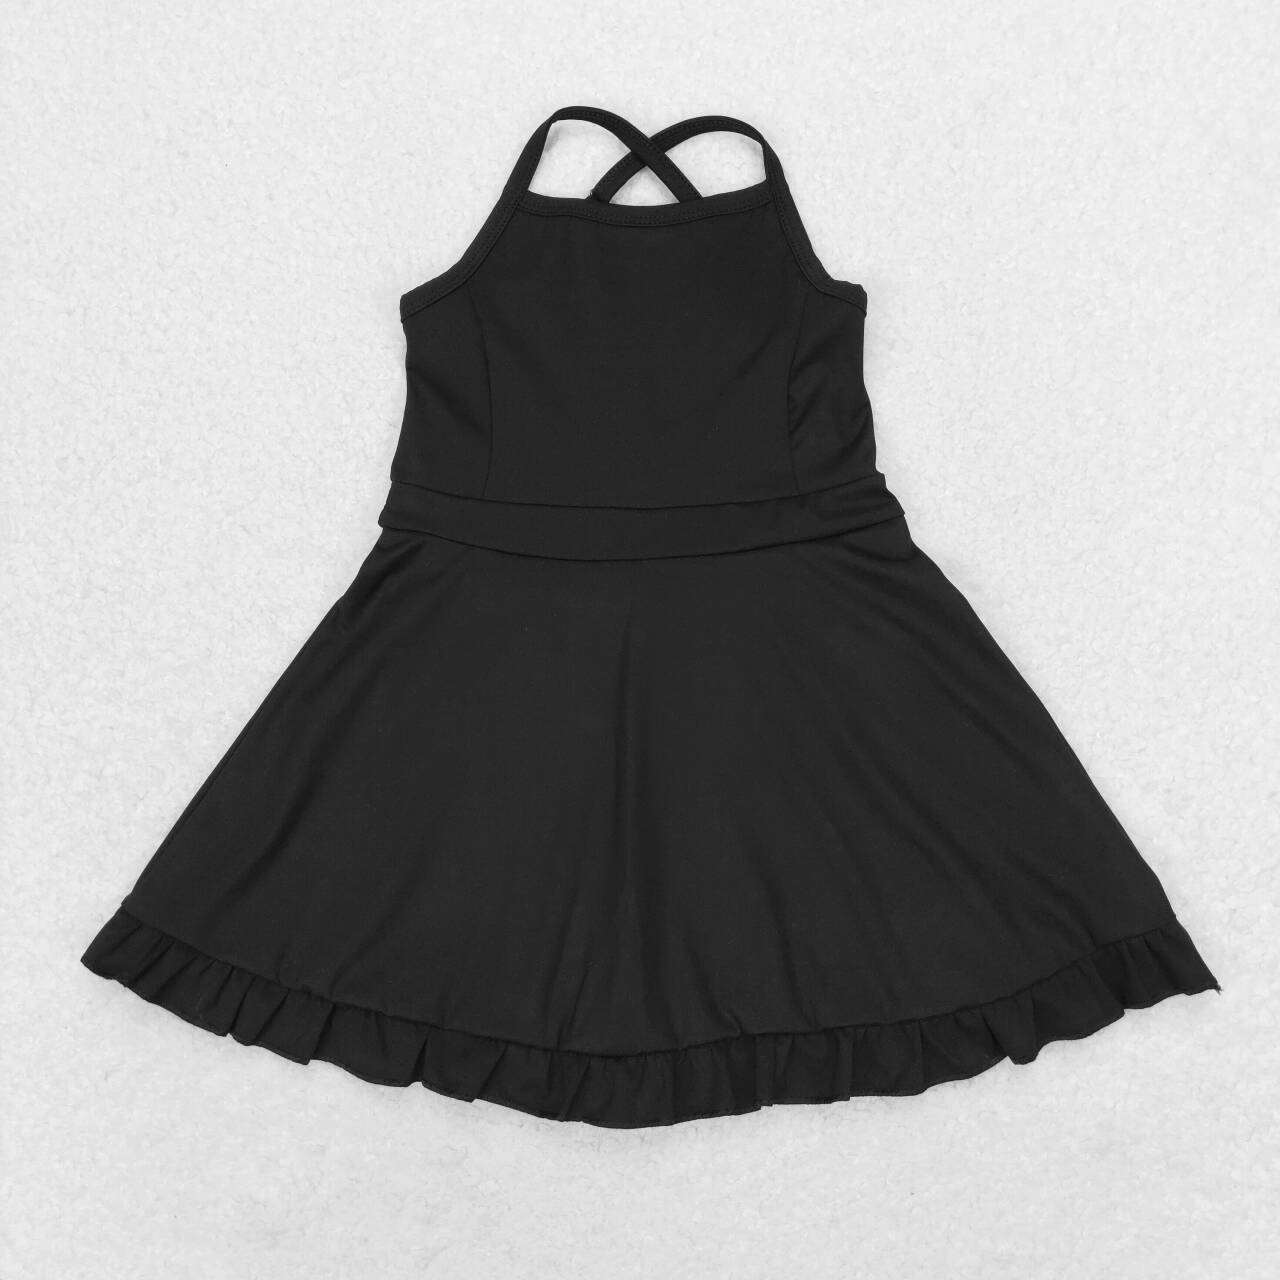 S0446 Black Color Girls Knee Length Shorts Sports Dress 1 Pieces Swimsuits